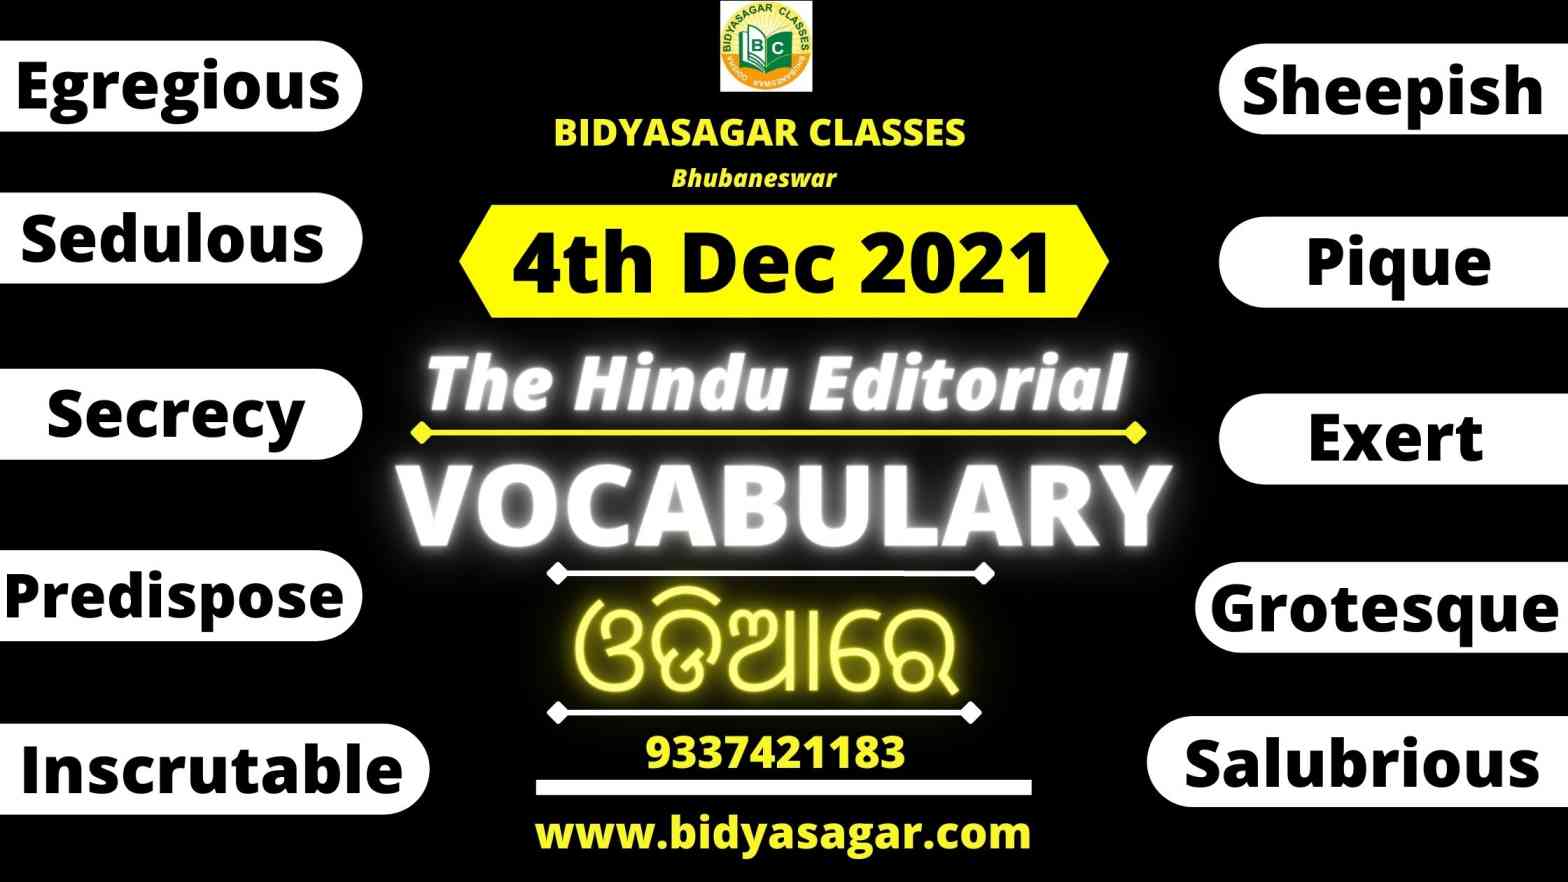 The Hindu Editorial Vocabulary of 4th December 2021